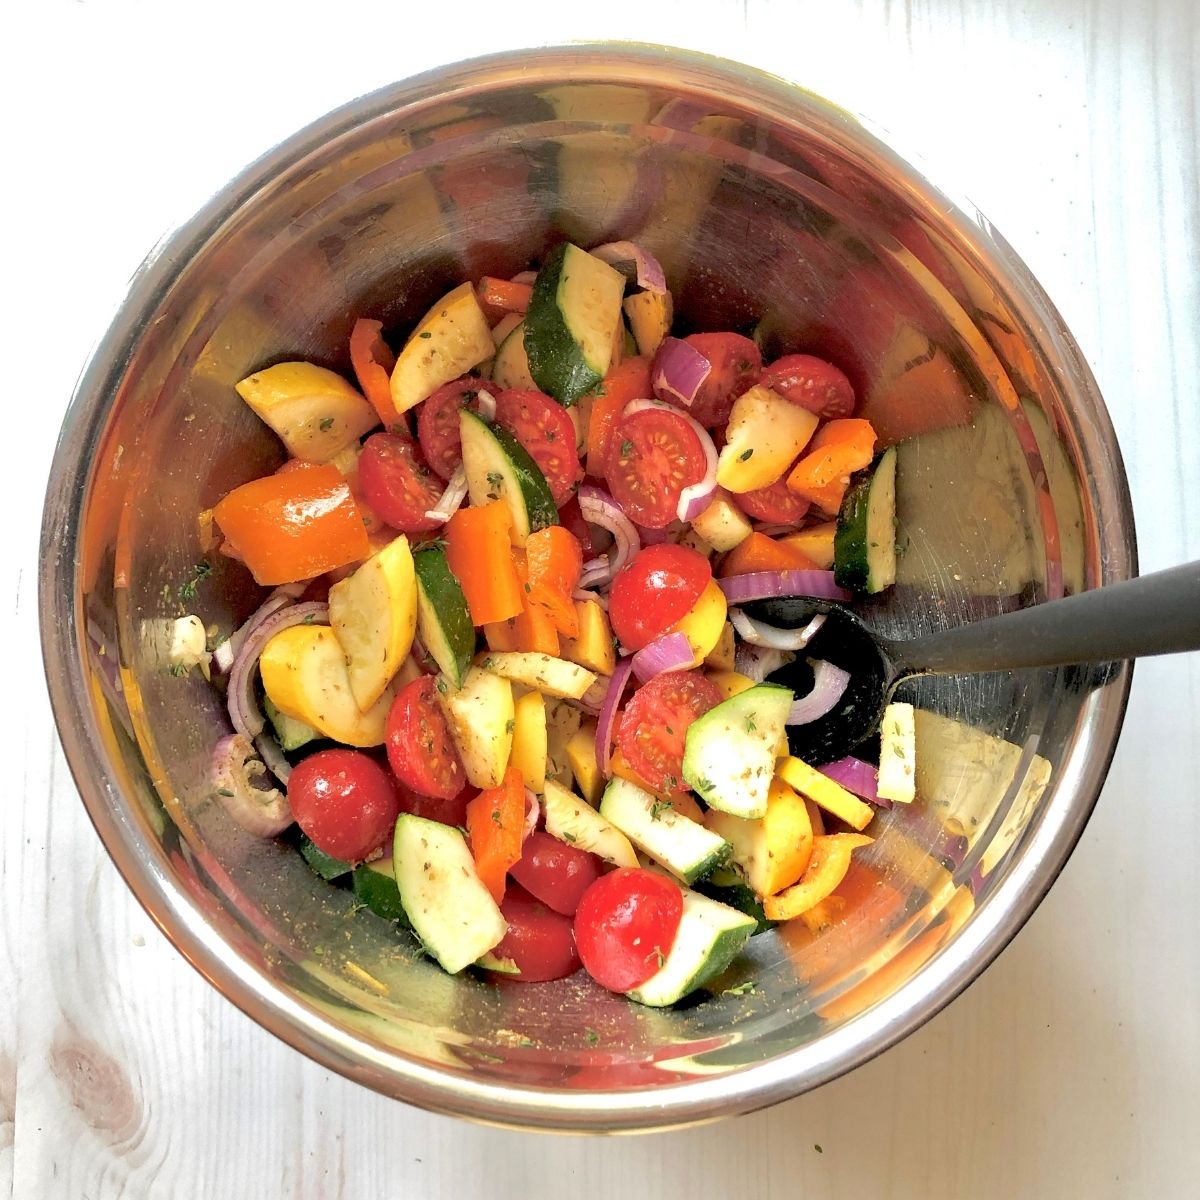 sliced tomato, zucchini, yellow squash, red onion, and orange bell peppers with olive oil and spices in a mixing bowl.